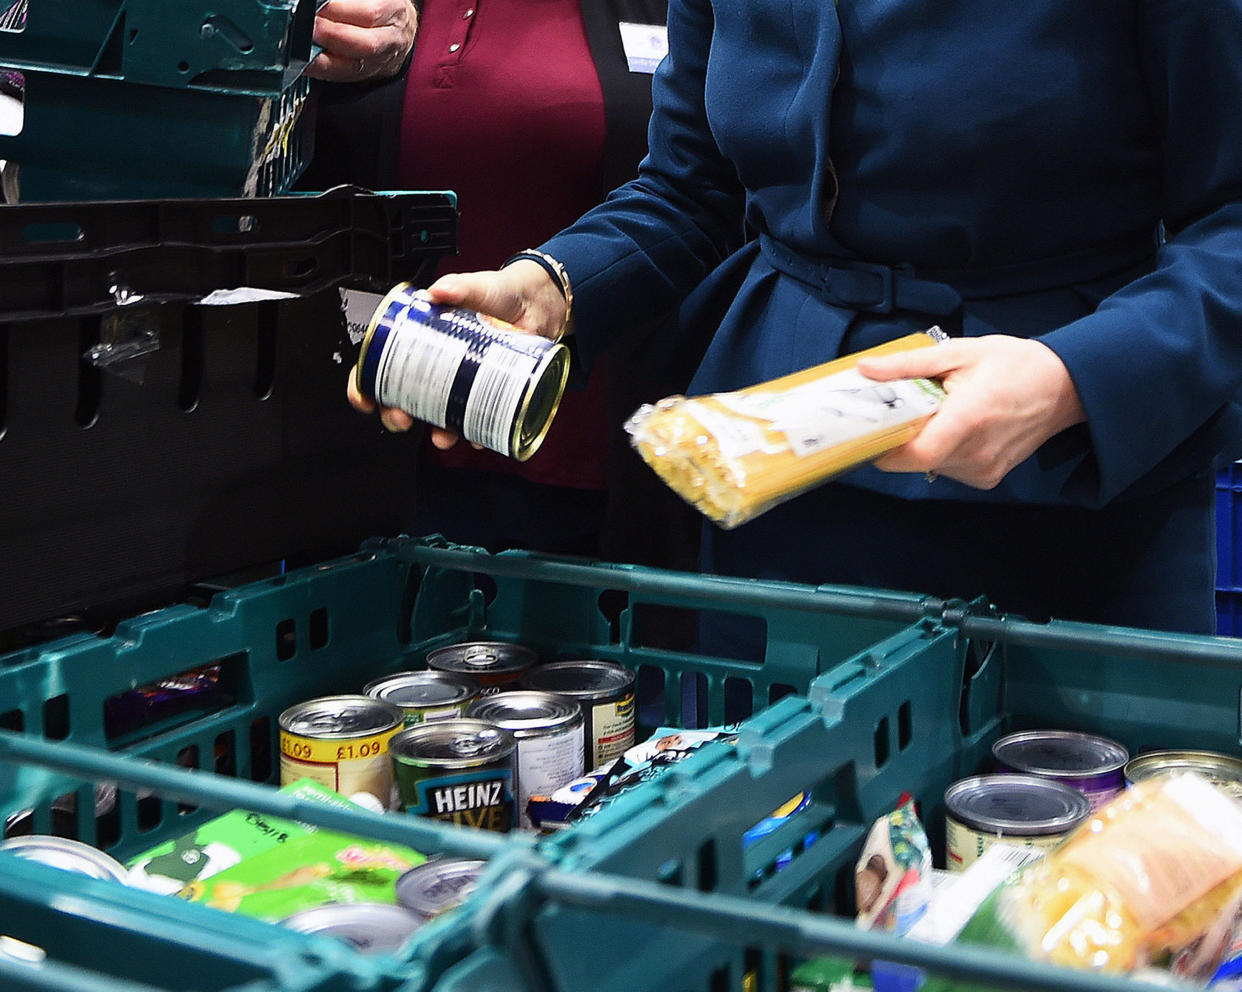 File photo dated 17/01/18 of goods at a food bank, as charities, food banks and local groups are experiencing a drop in donations as cost-of-living pressures cause demand to reach 